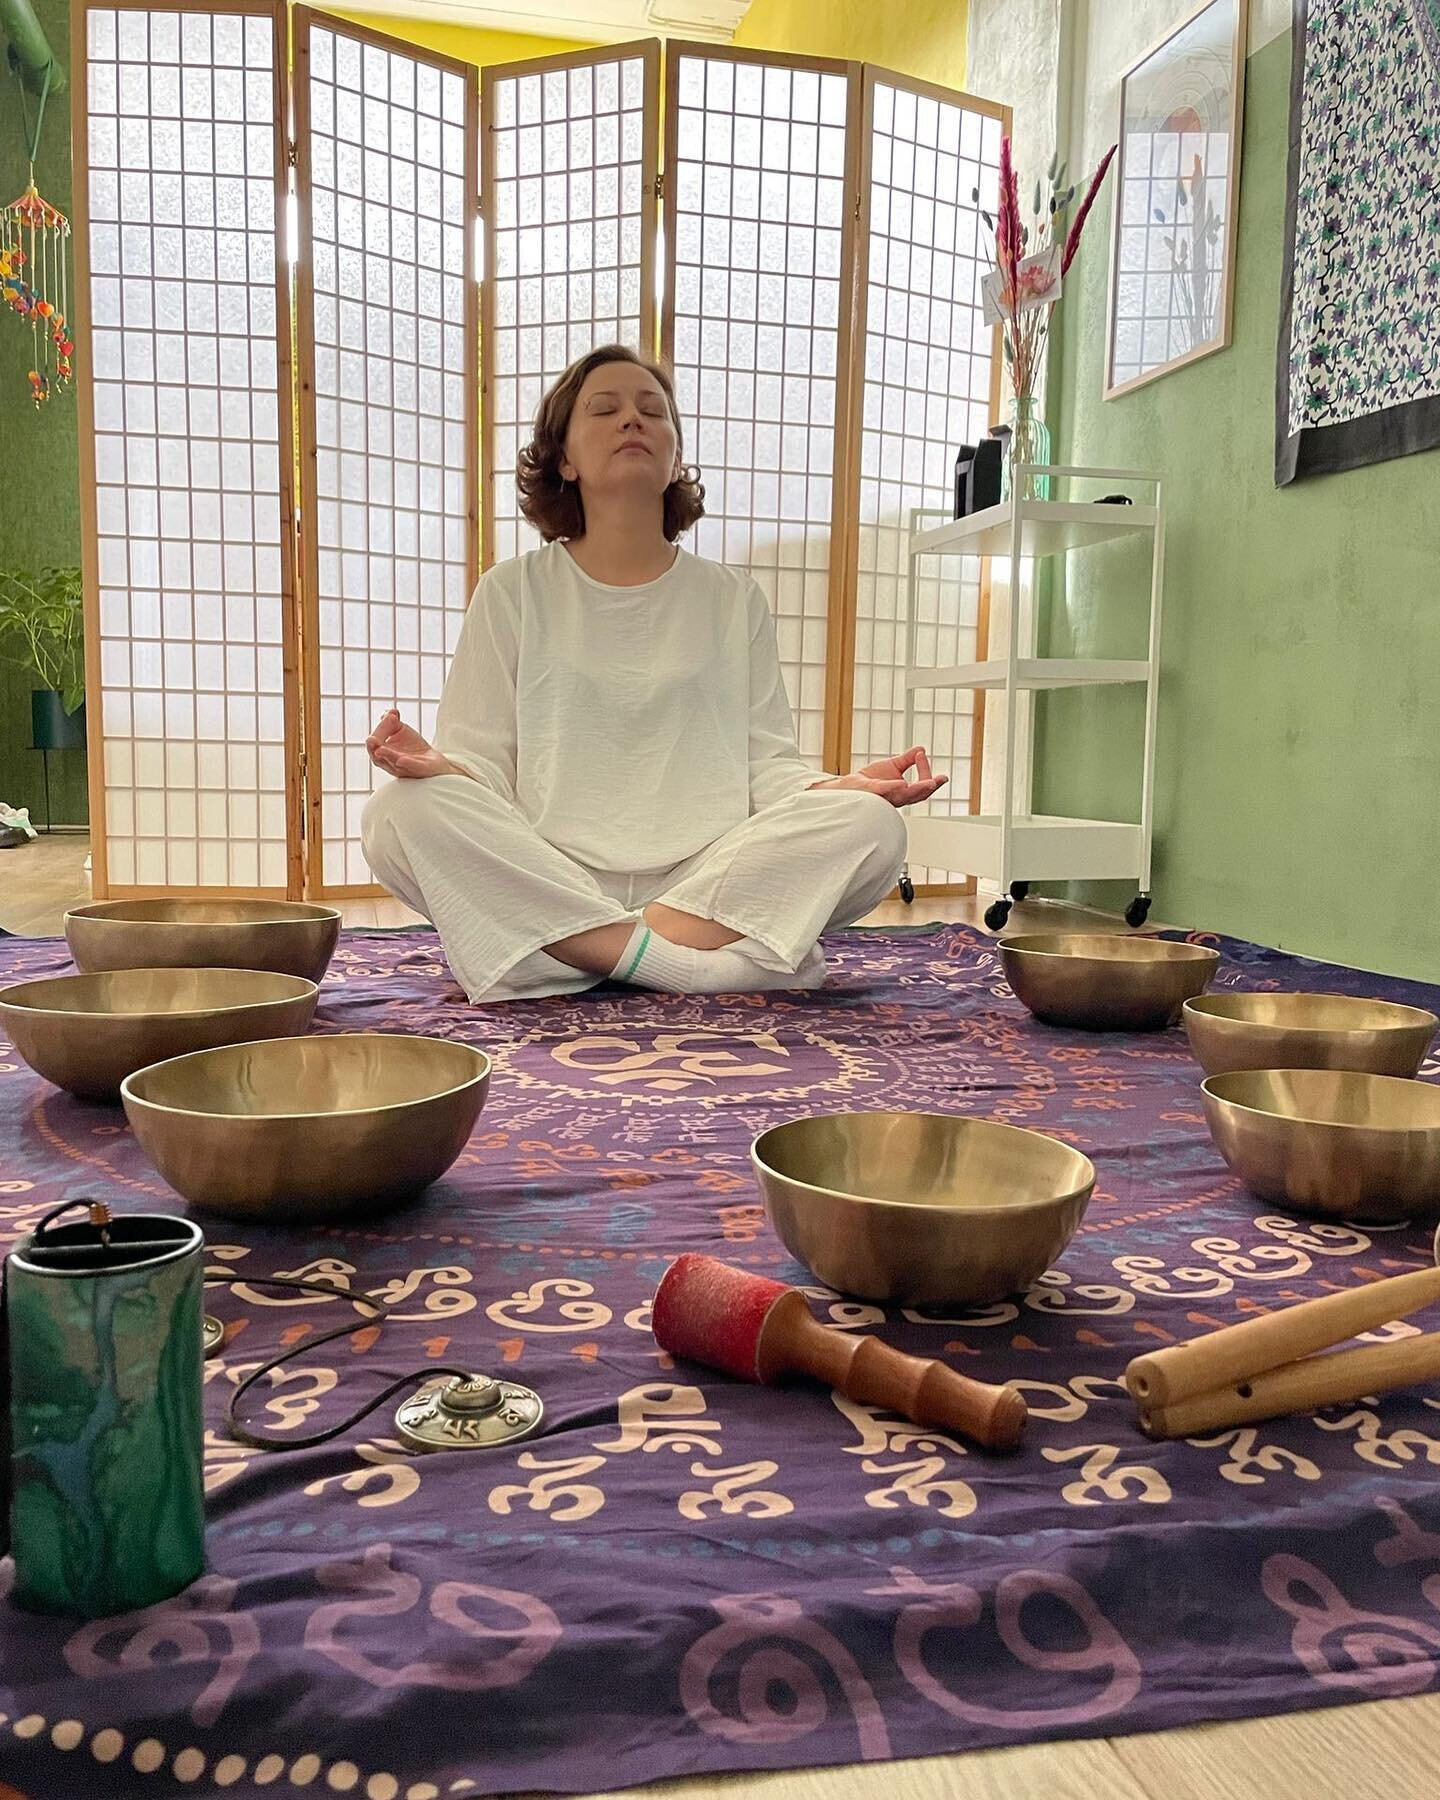 Today we are happy to talk about our sound healing workshop! This experience is the opportunity to rest your brain during the ancient practice of deep relaxation using the sound and vibrations of Tibetan singing bowls.

We welcome Orysia Sai @orysias